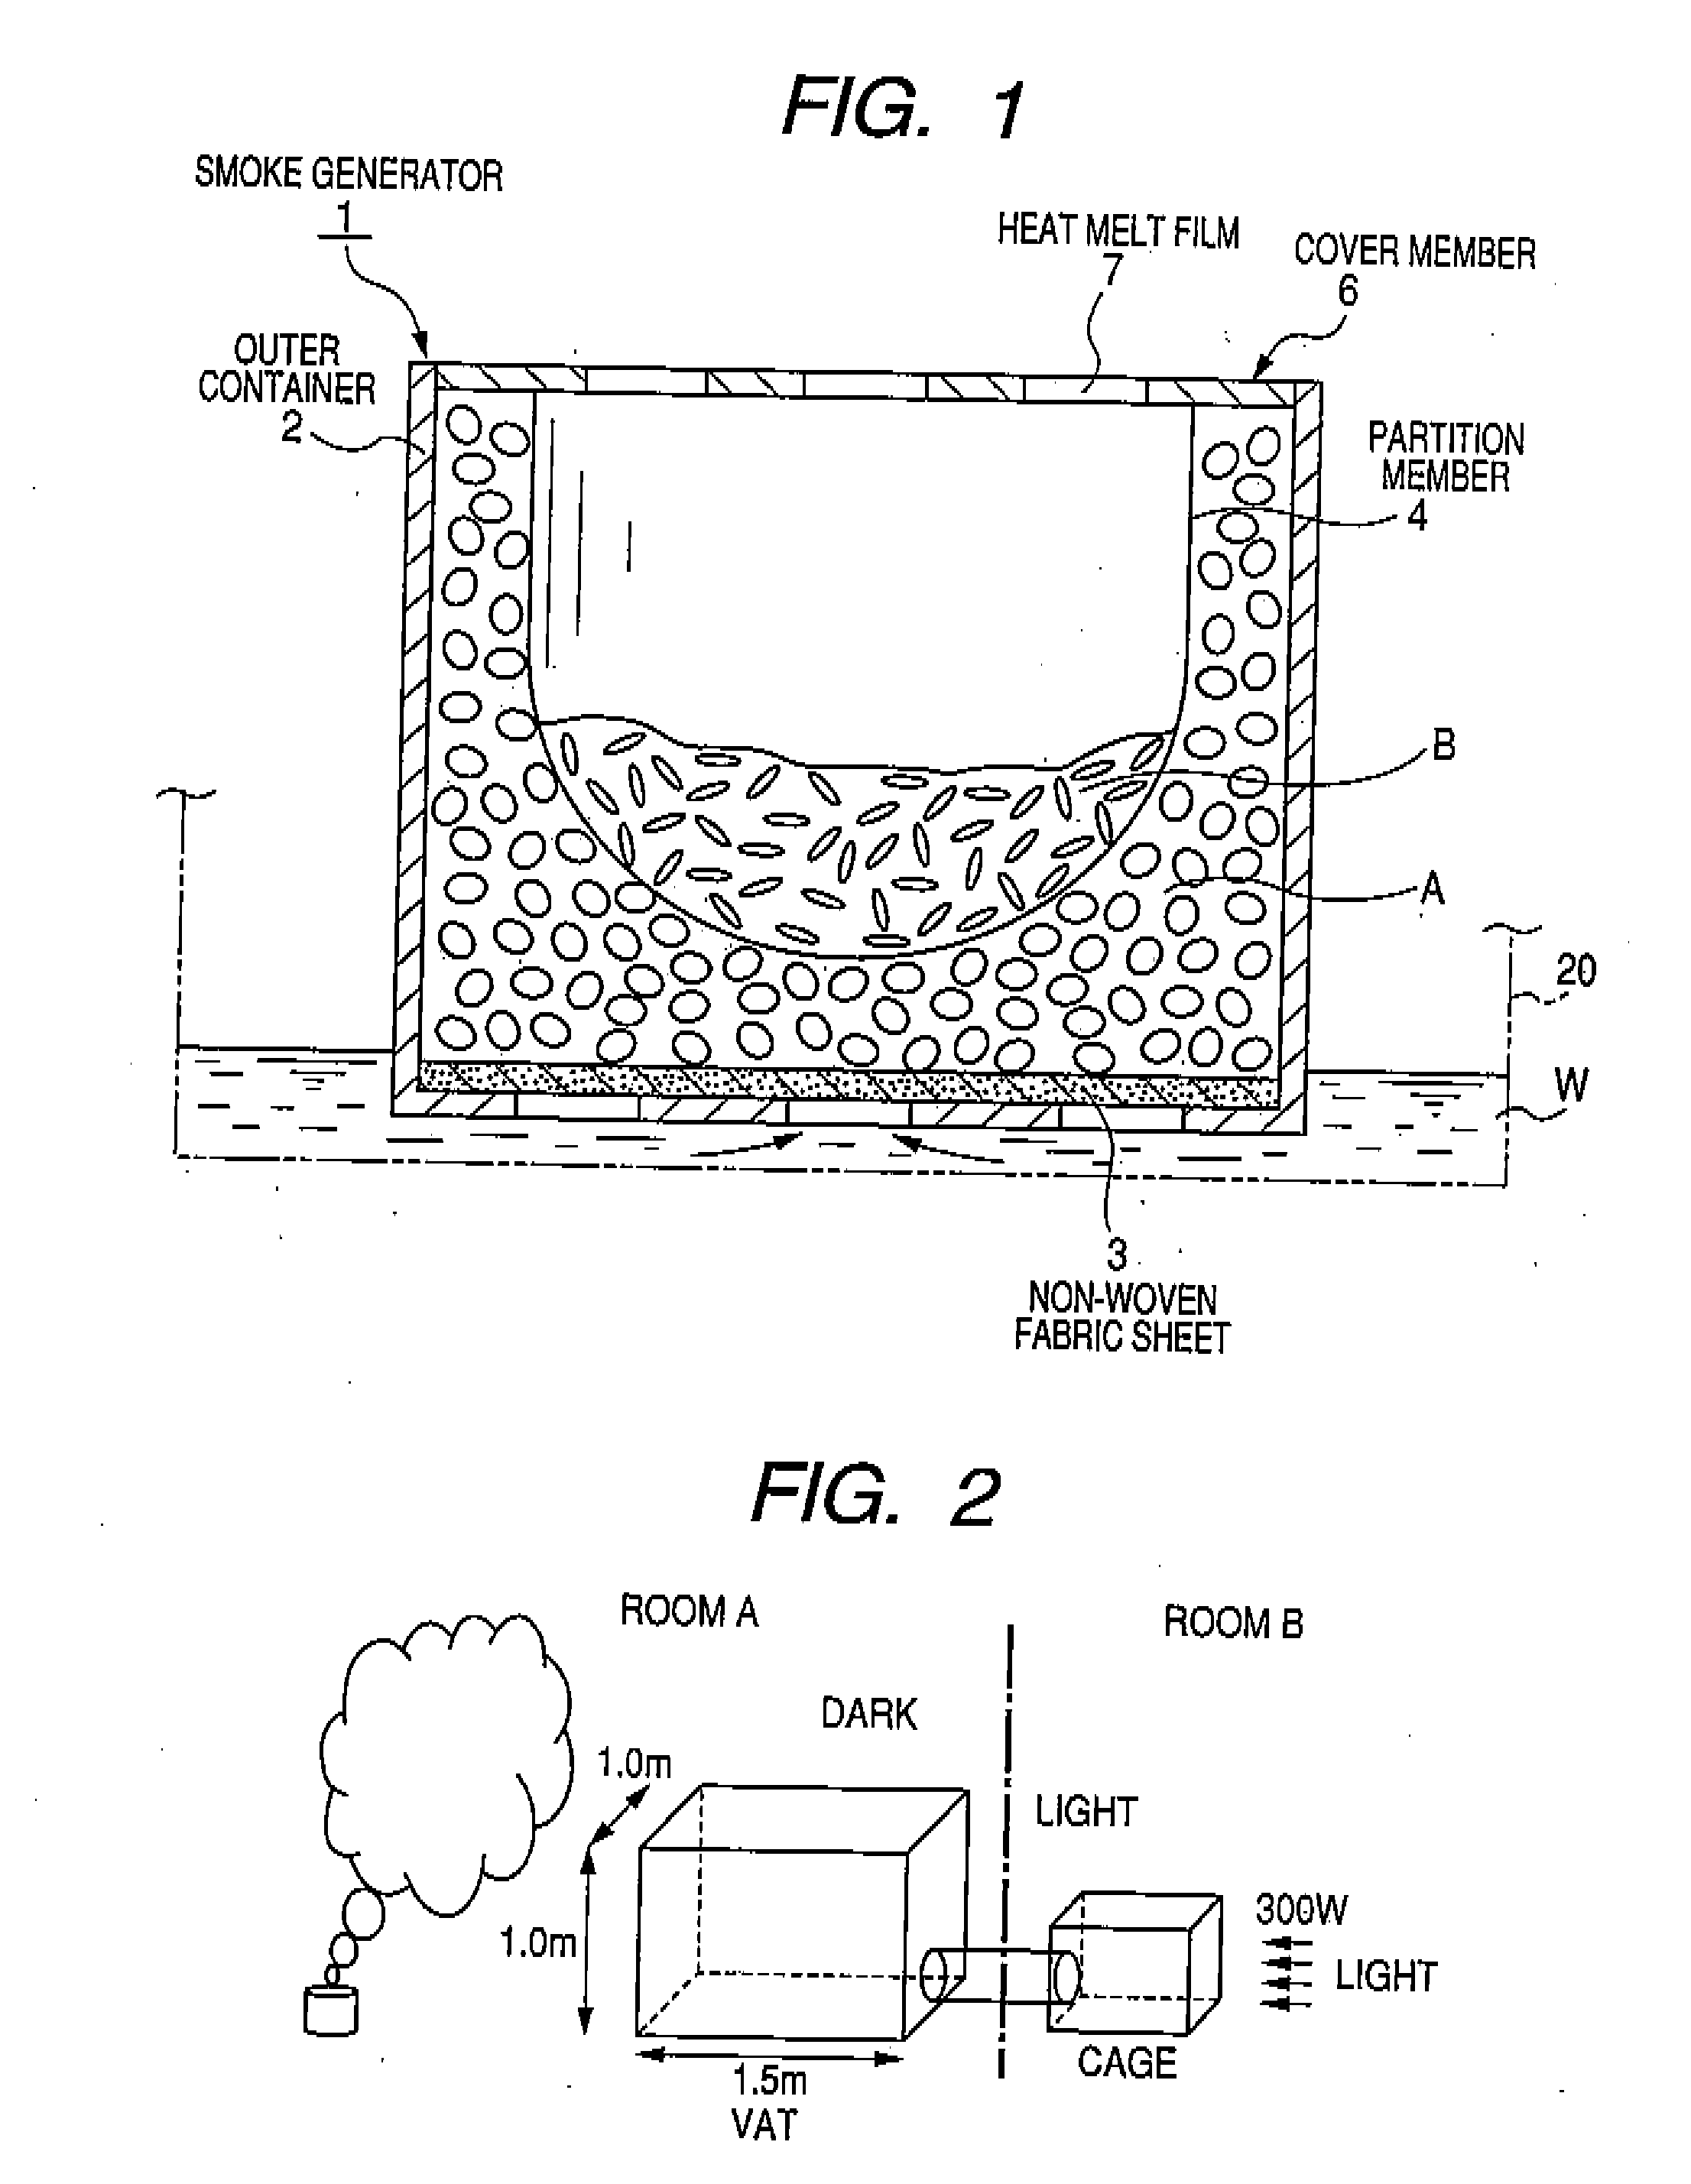 Method for repelling a rodent, method for capturing a rodent and rodent repellent